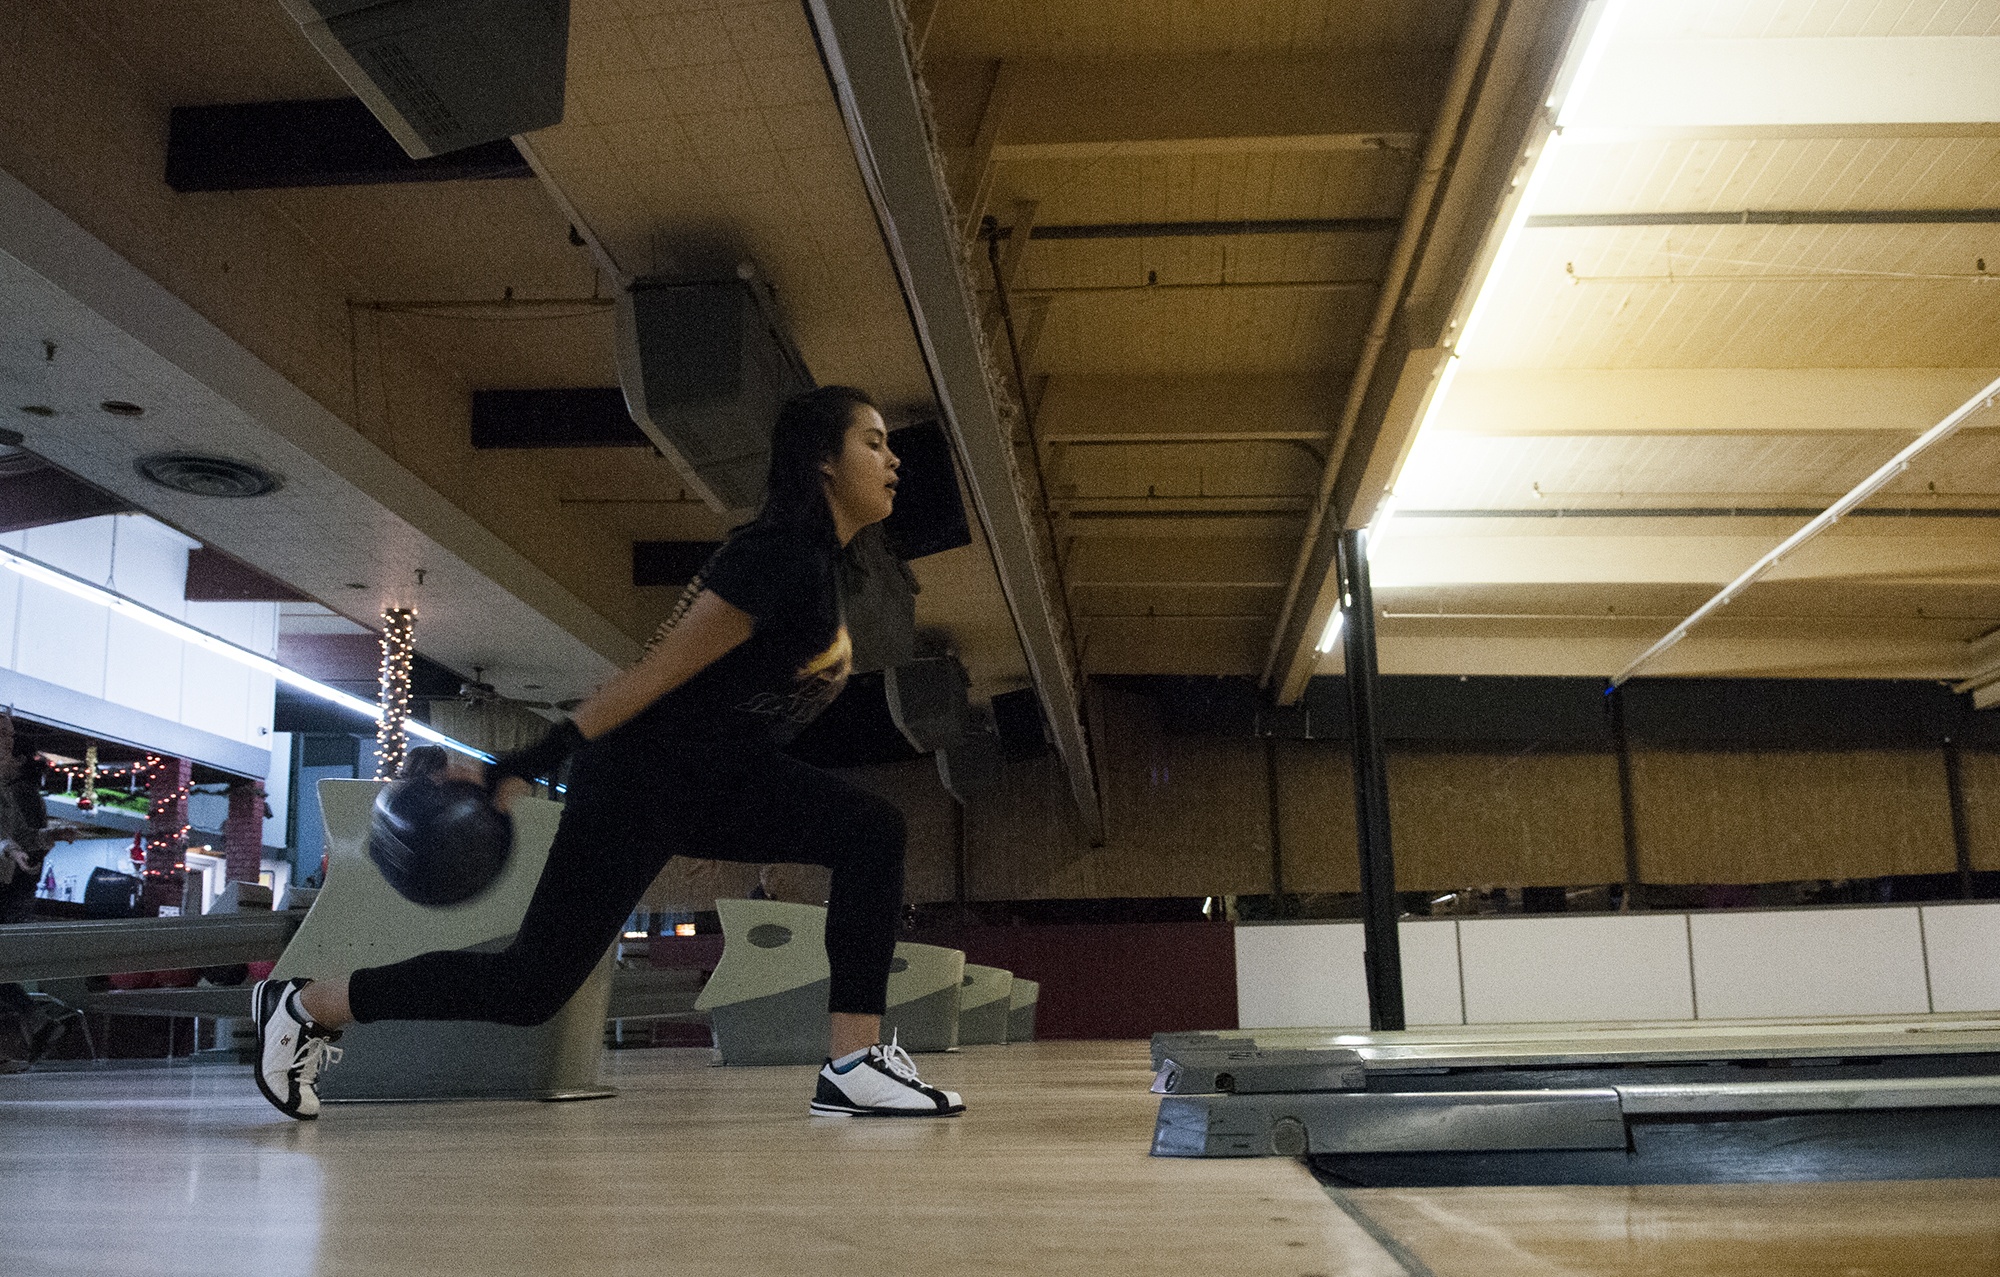 (Brendan Carl | The Daily World) Aberdeen’s Iliana Mercado bowls a frame during practice on Wednesday.